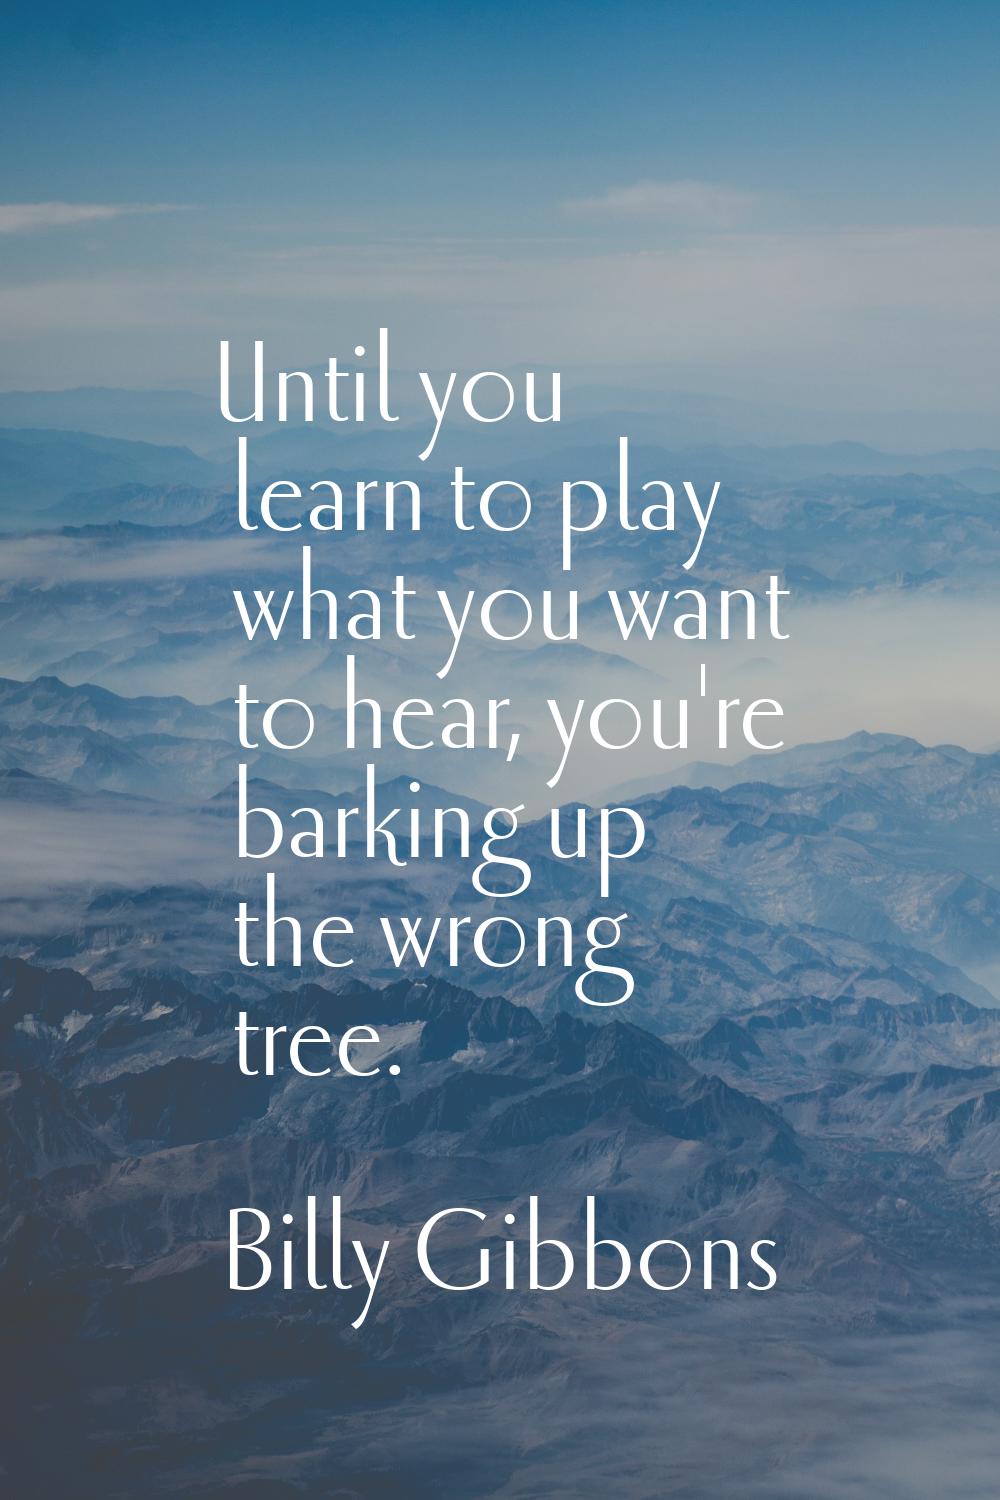 Until you learn to play what you want to hear, you're barking up the wrong tree.